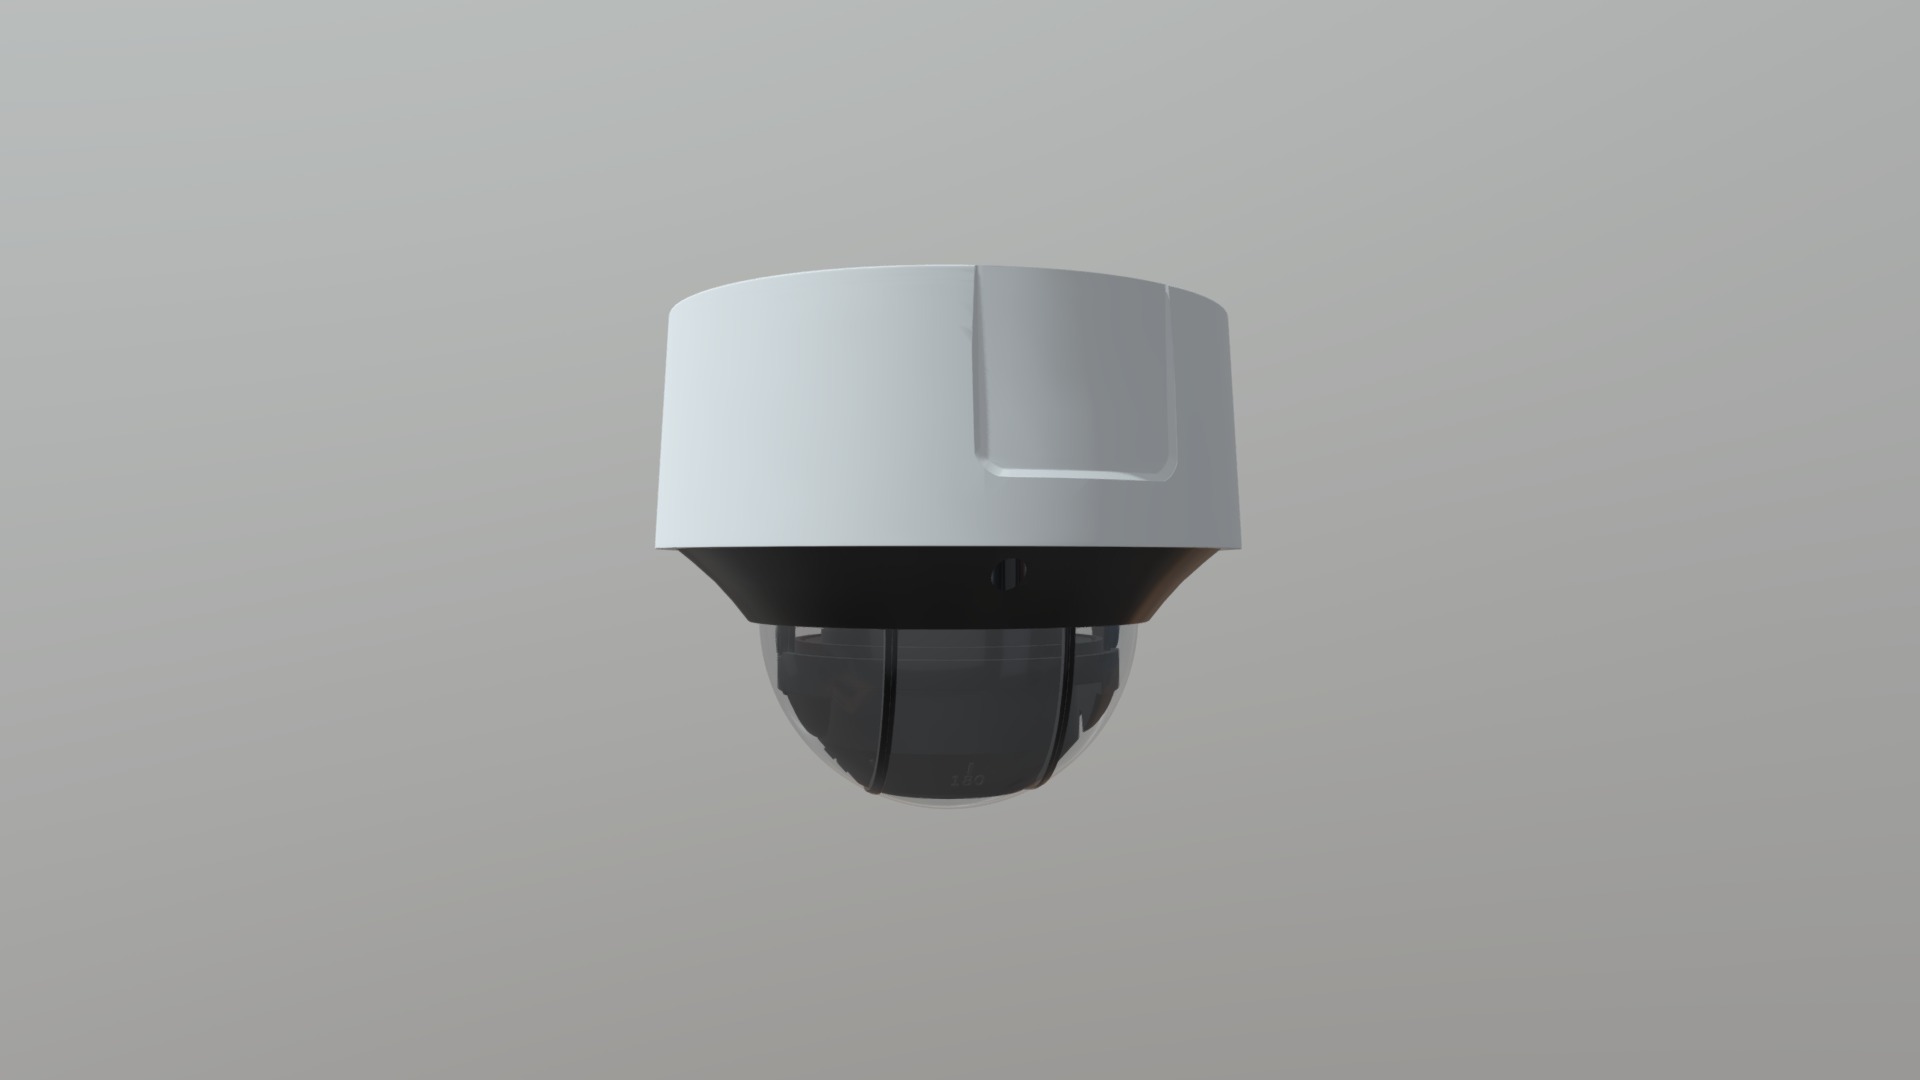 3D model Dome Security Camera model 1 - This is a 3D model of the Dome Security Camera model 1. The 3D model is about a white square with a black circle on it.